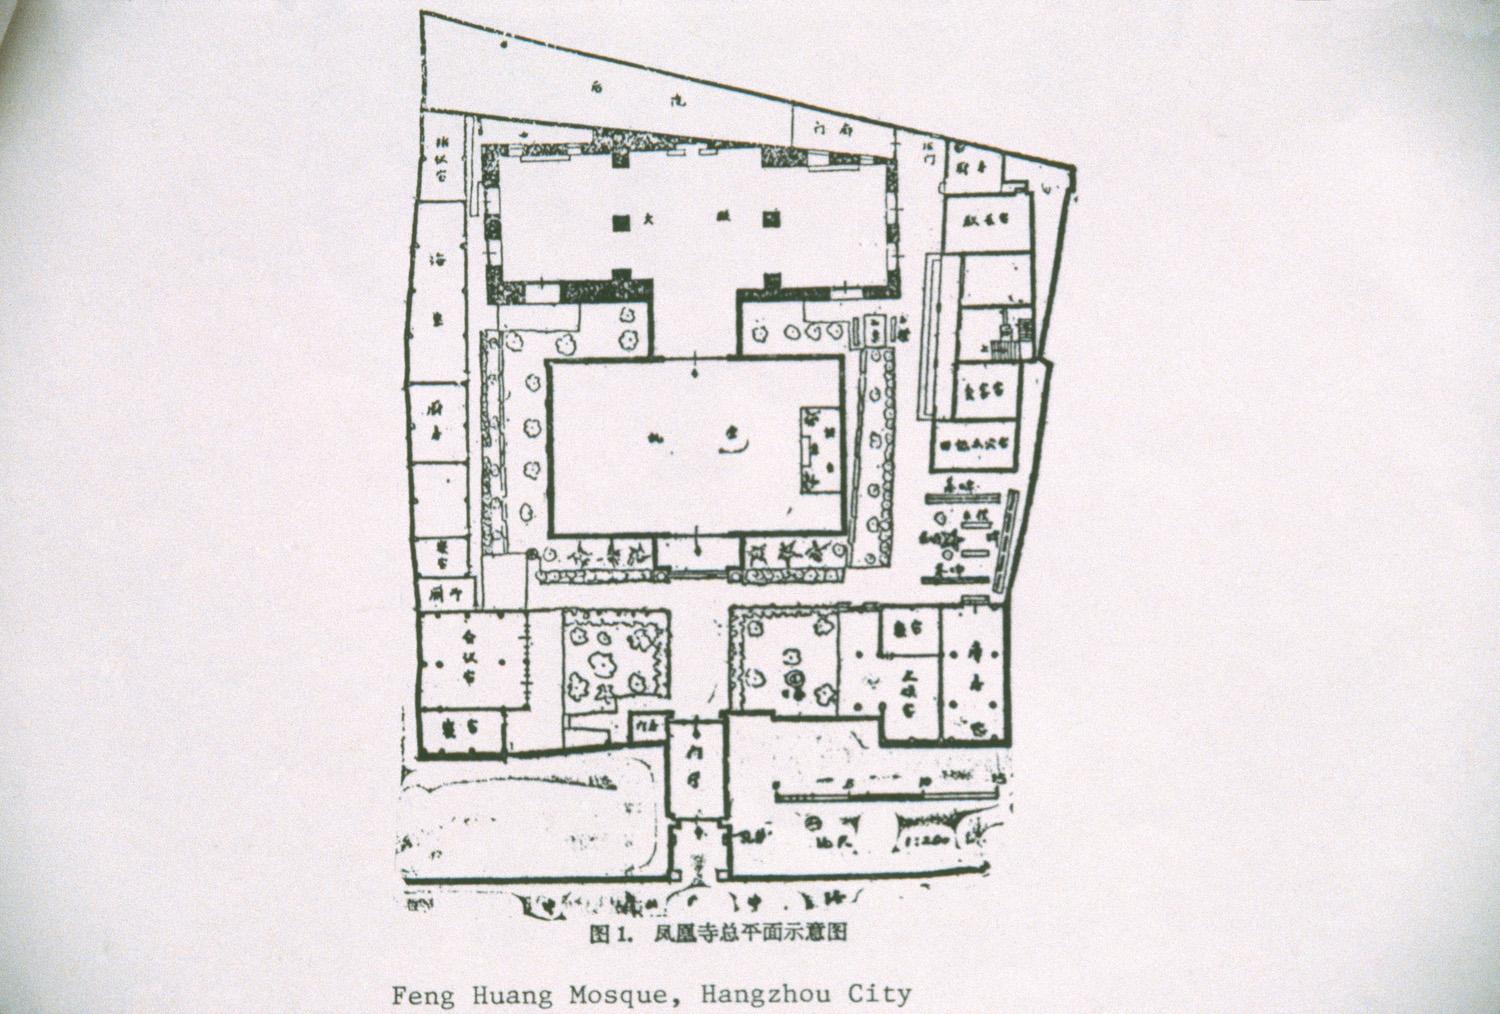 Plan of the mosque, showing the original prayer hall at top and the prayer hall extension at center, with the Zhongshan Road at the bottom